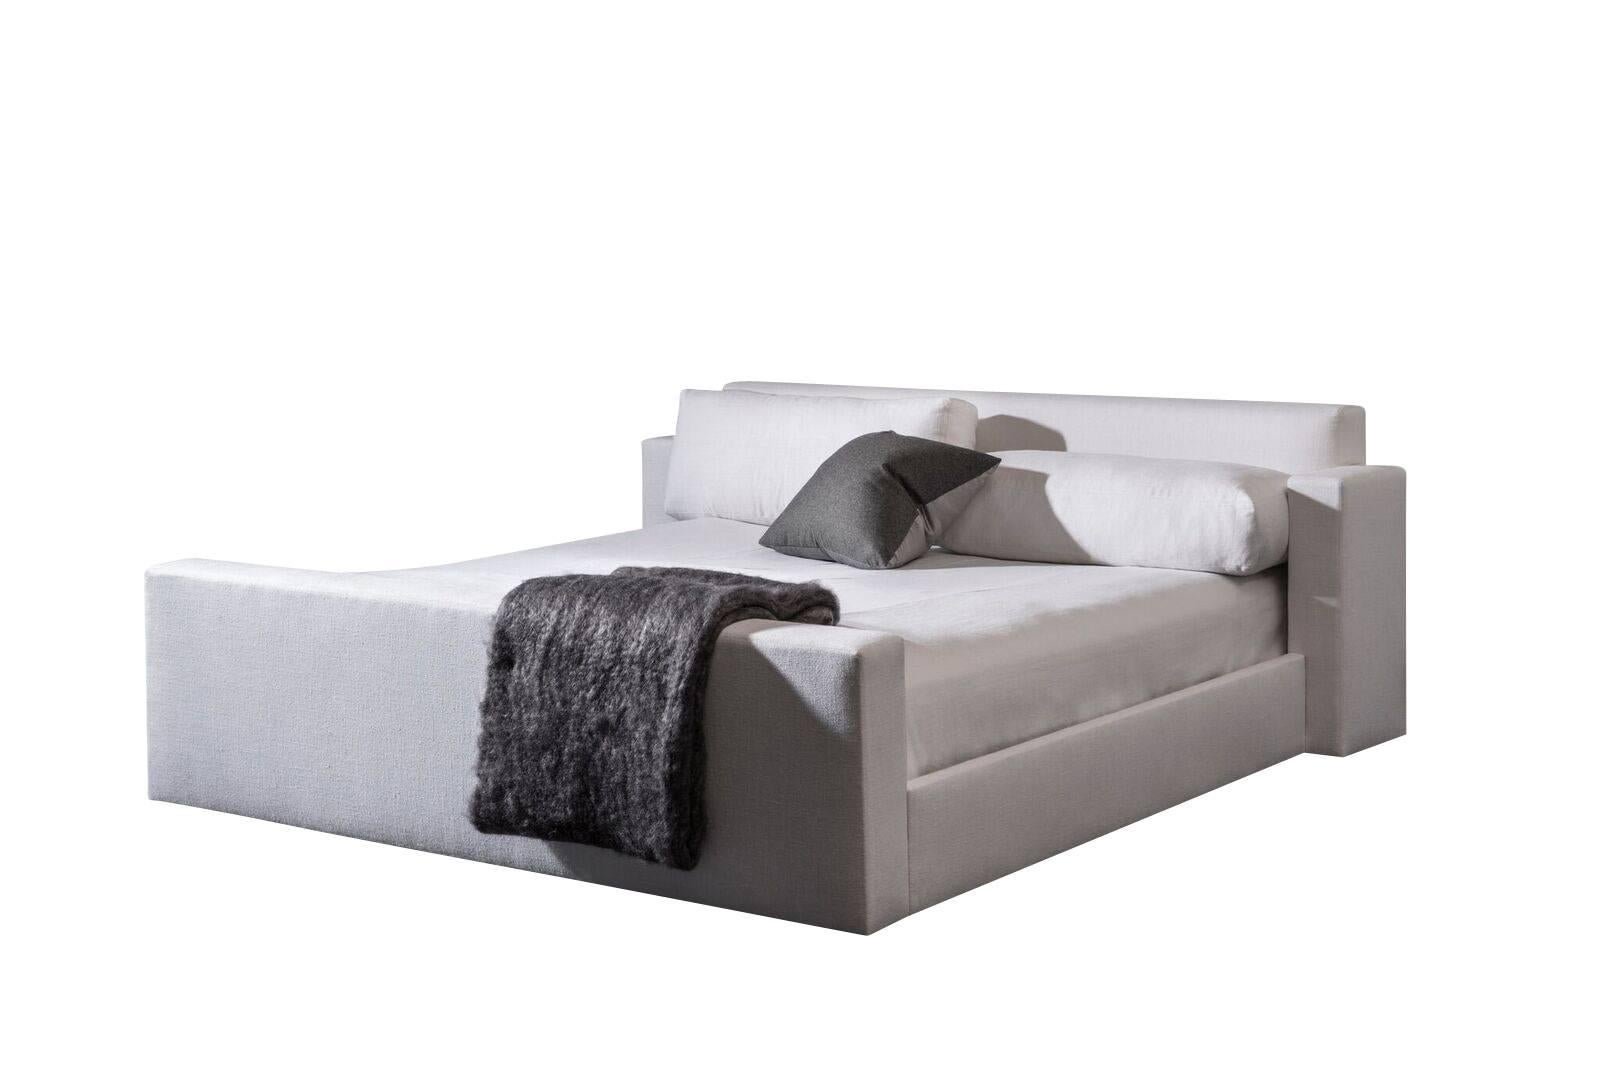 Beautiful Model One king Bed By Michael Dawkins